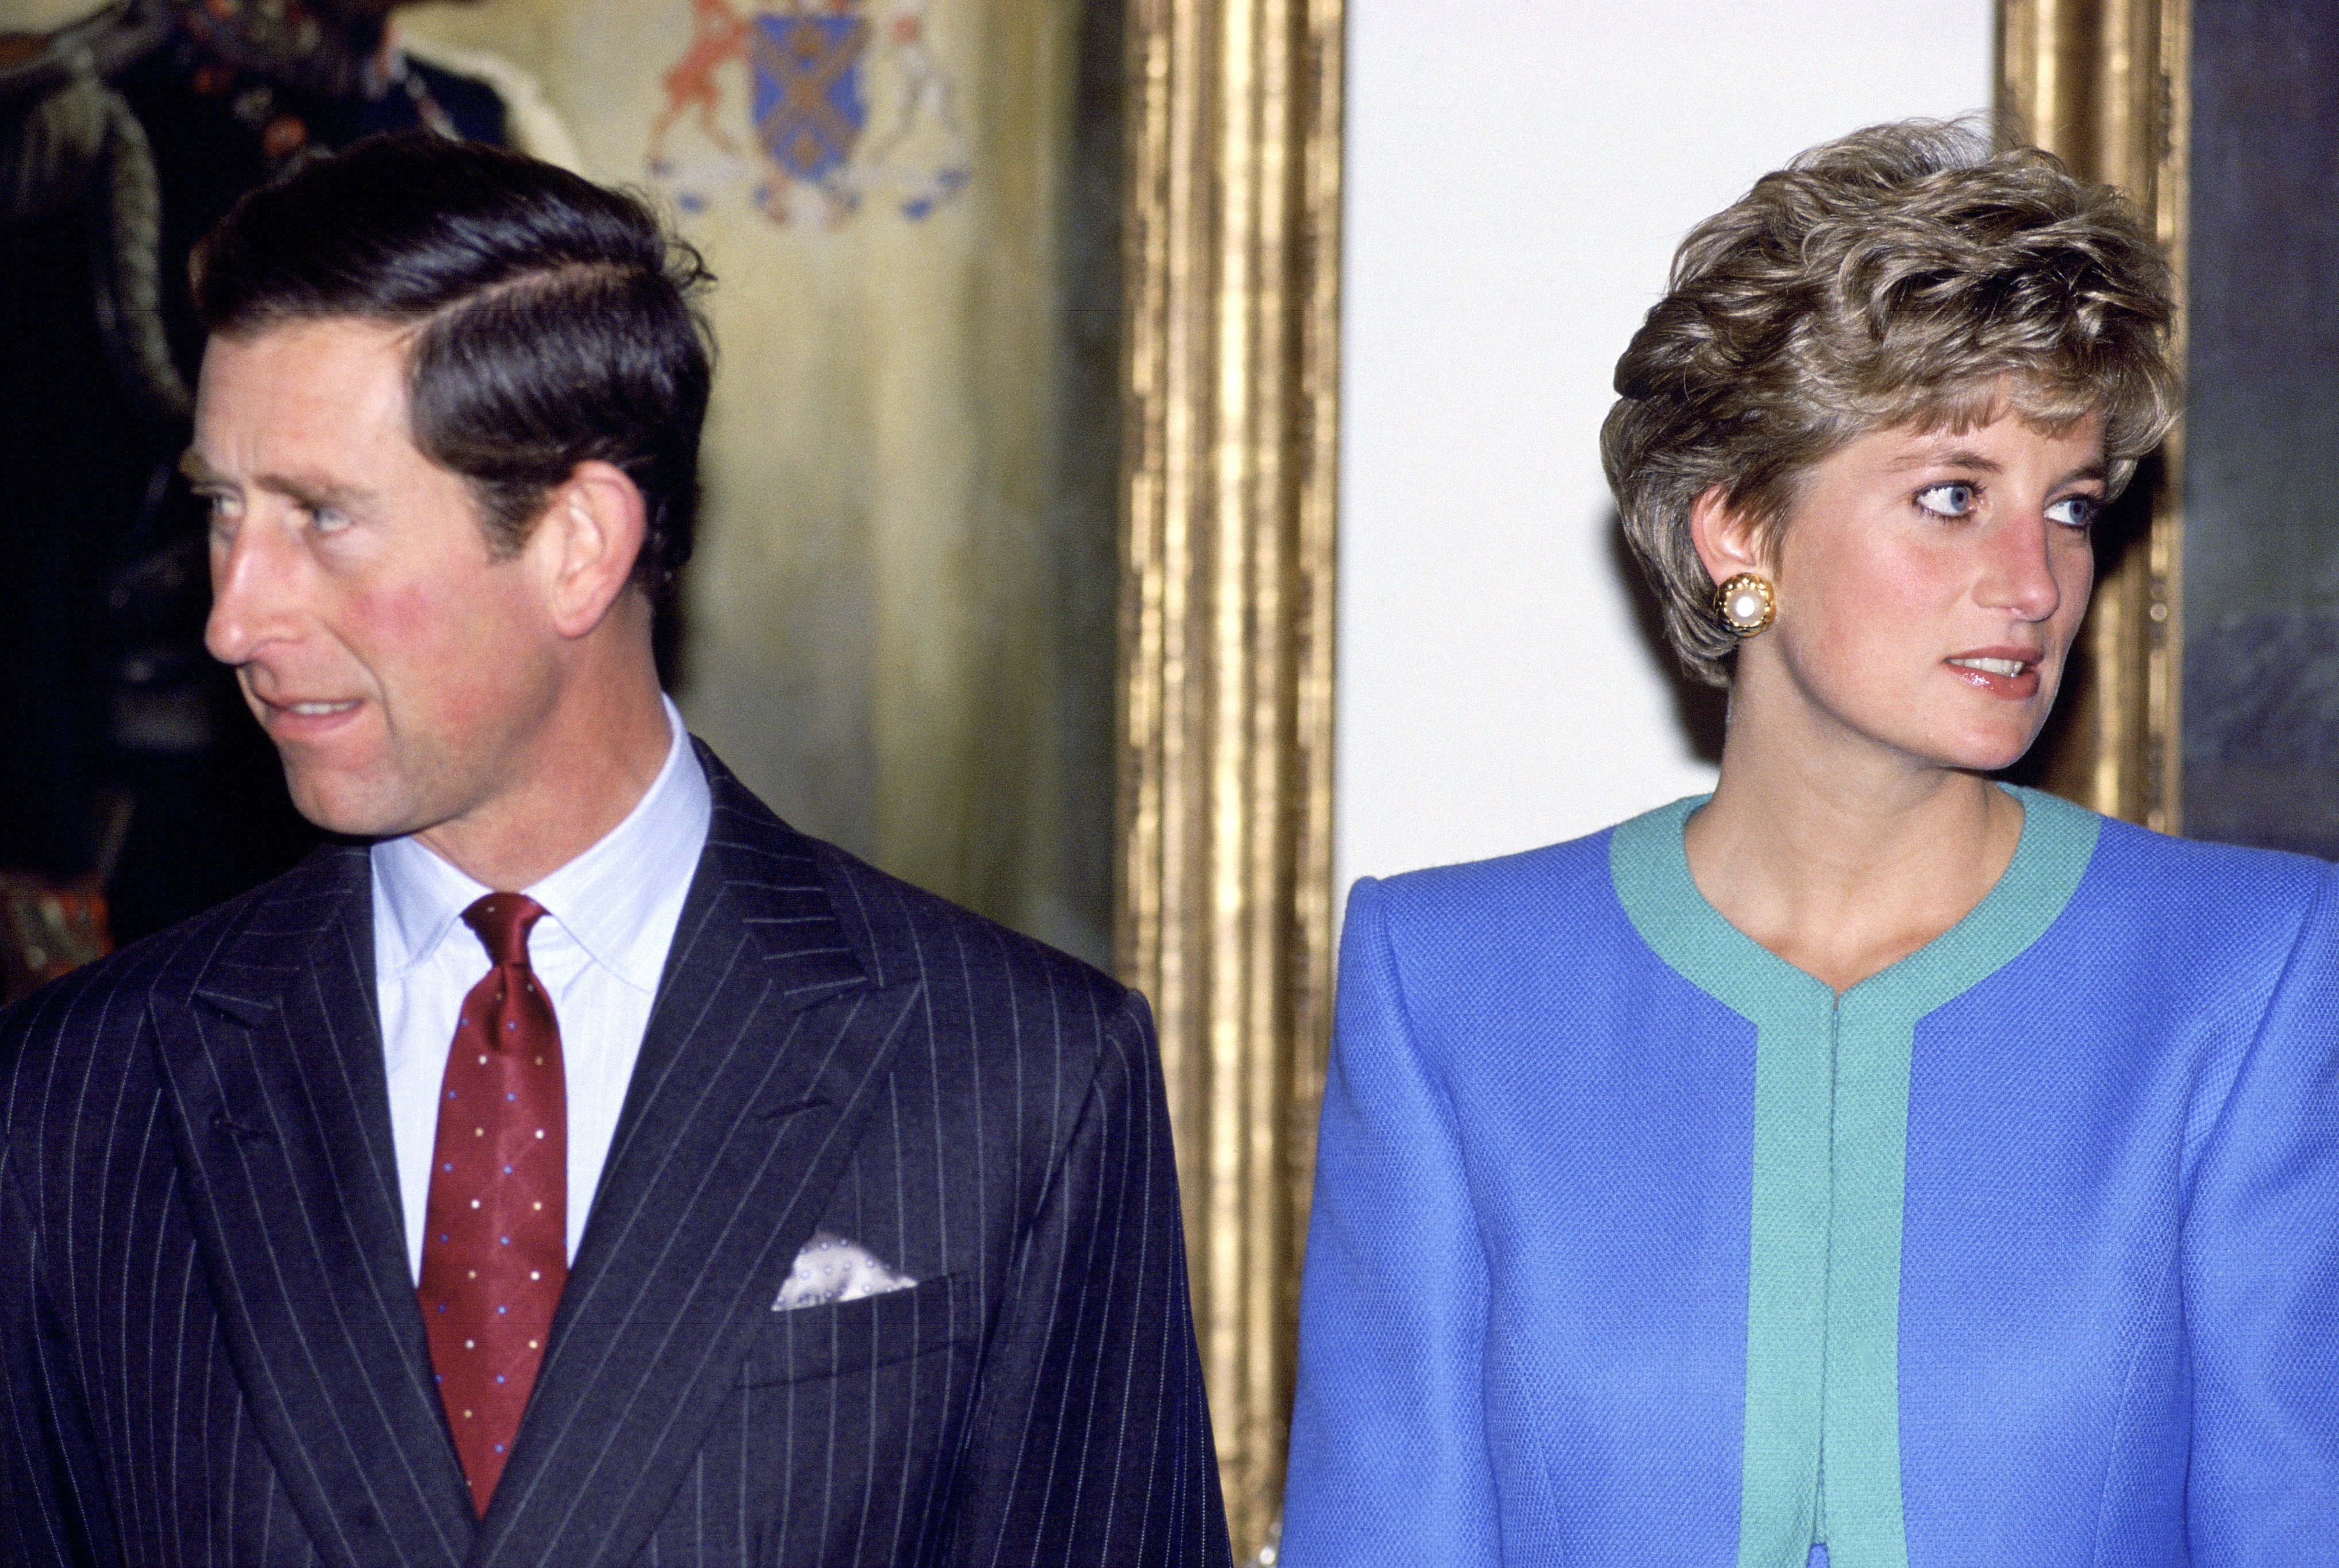 Prince, Prince of Wales and Diana, Princess of Wales pictured during a visit to Ottawa in Canada.┃Source: Getty Images